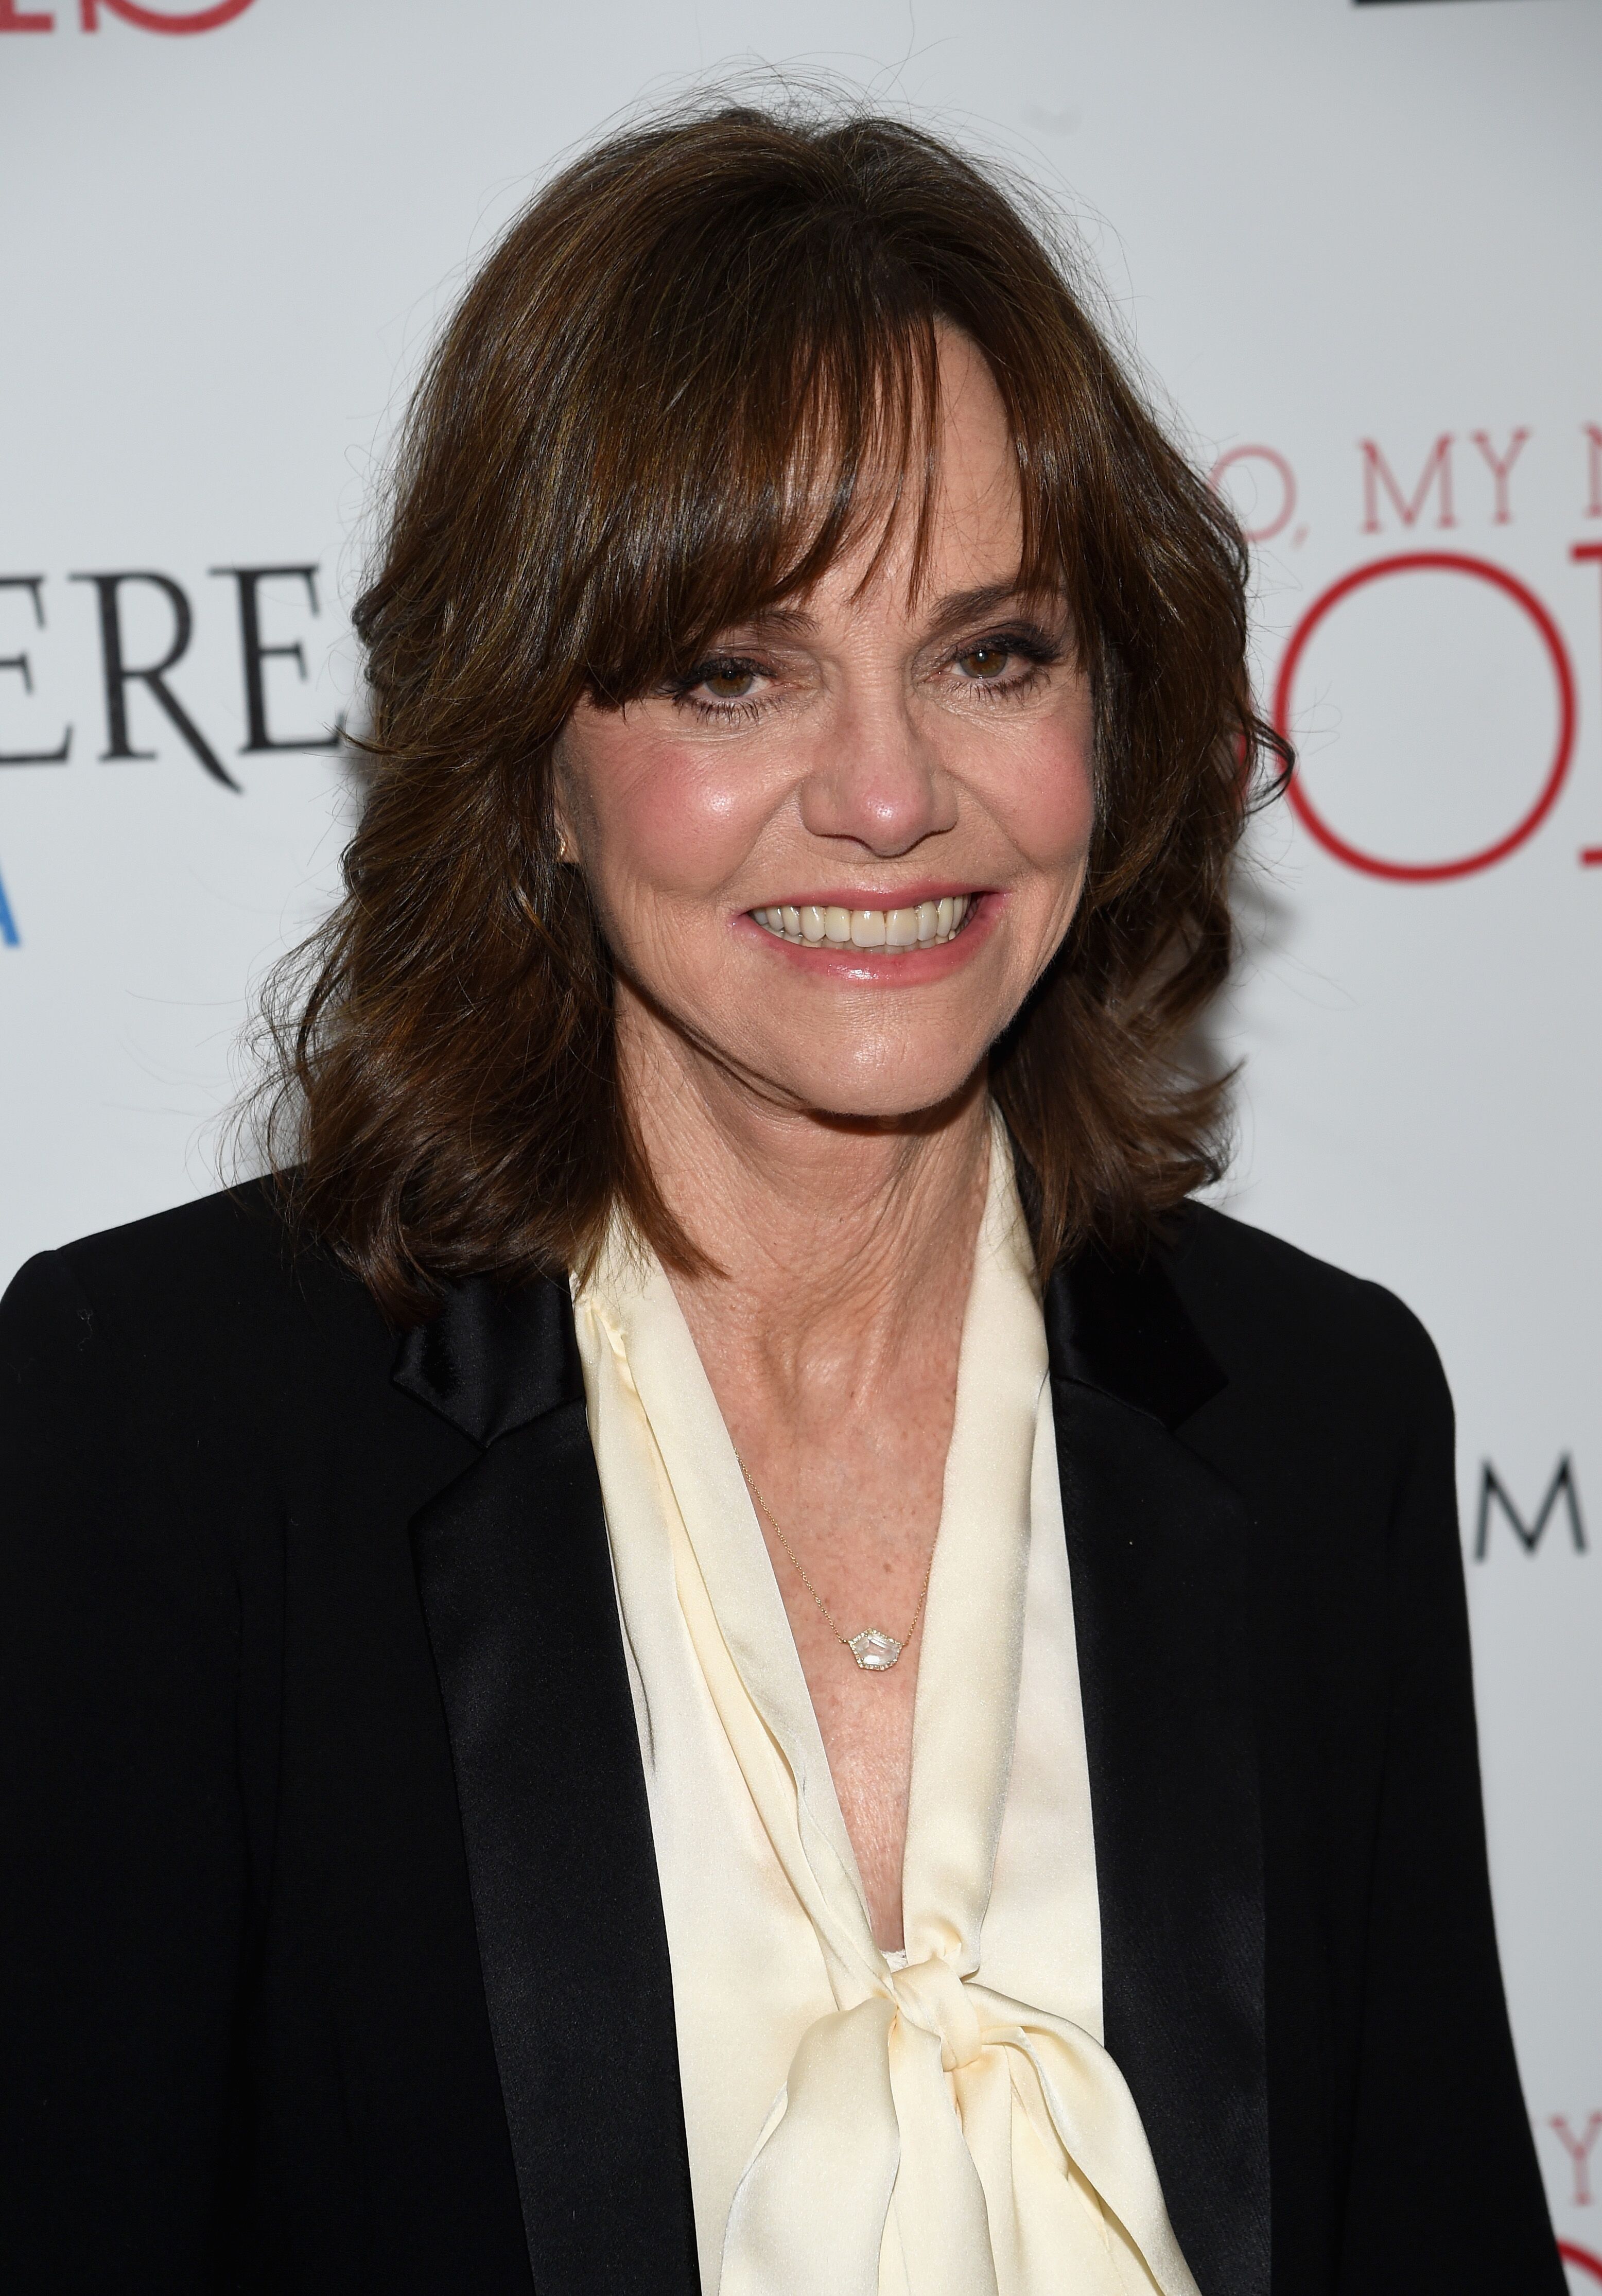 Sally Field arrives at the premiere of "Hello, My Name Is Doris." | Source: Getty Images